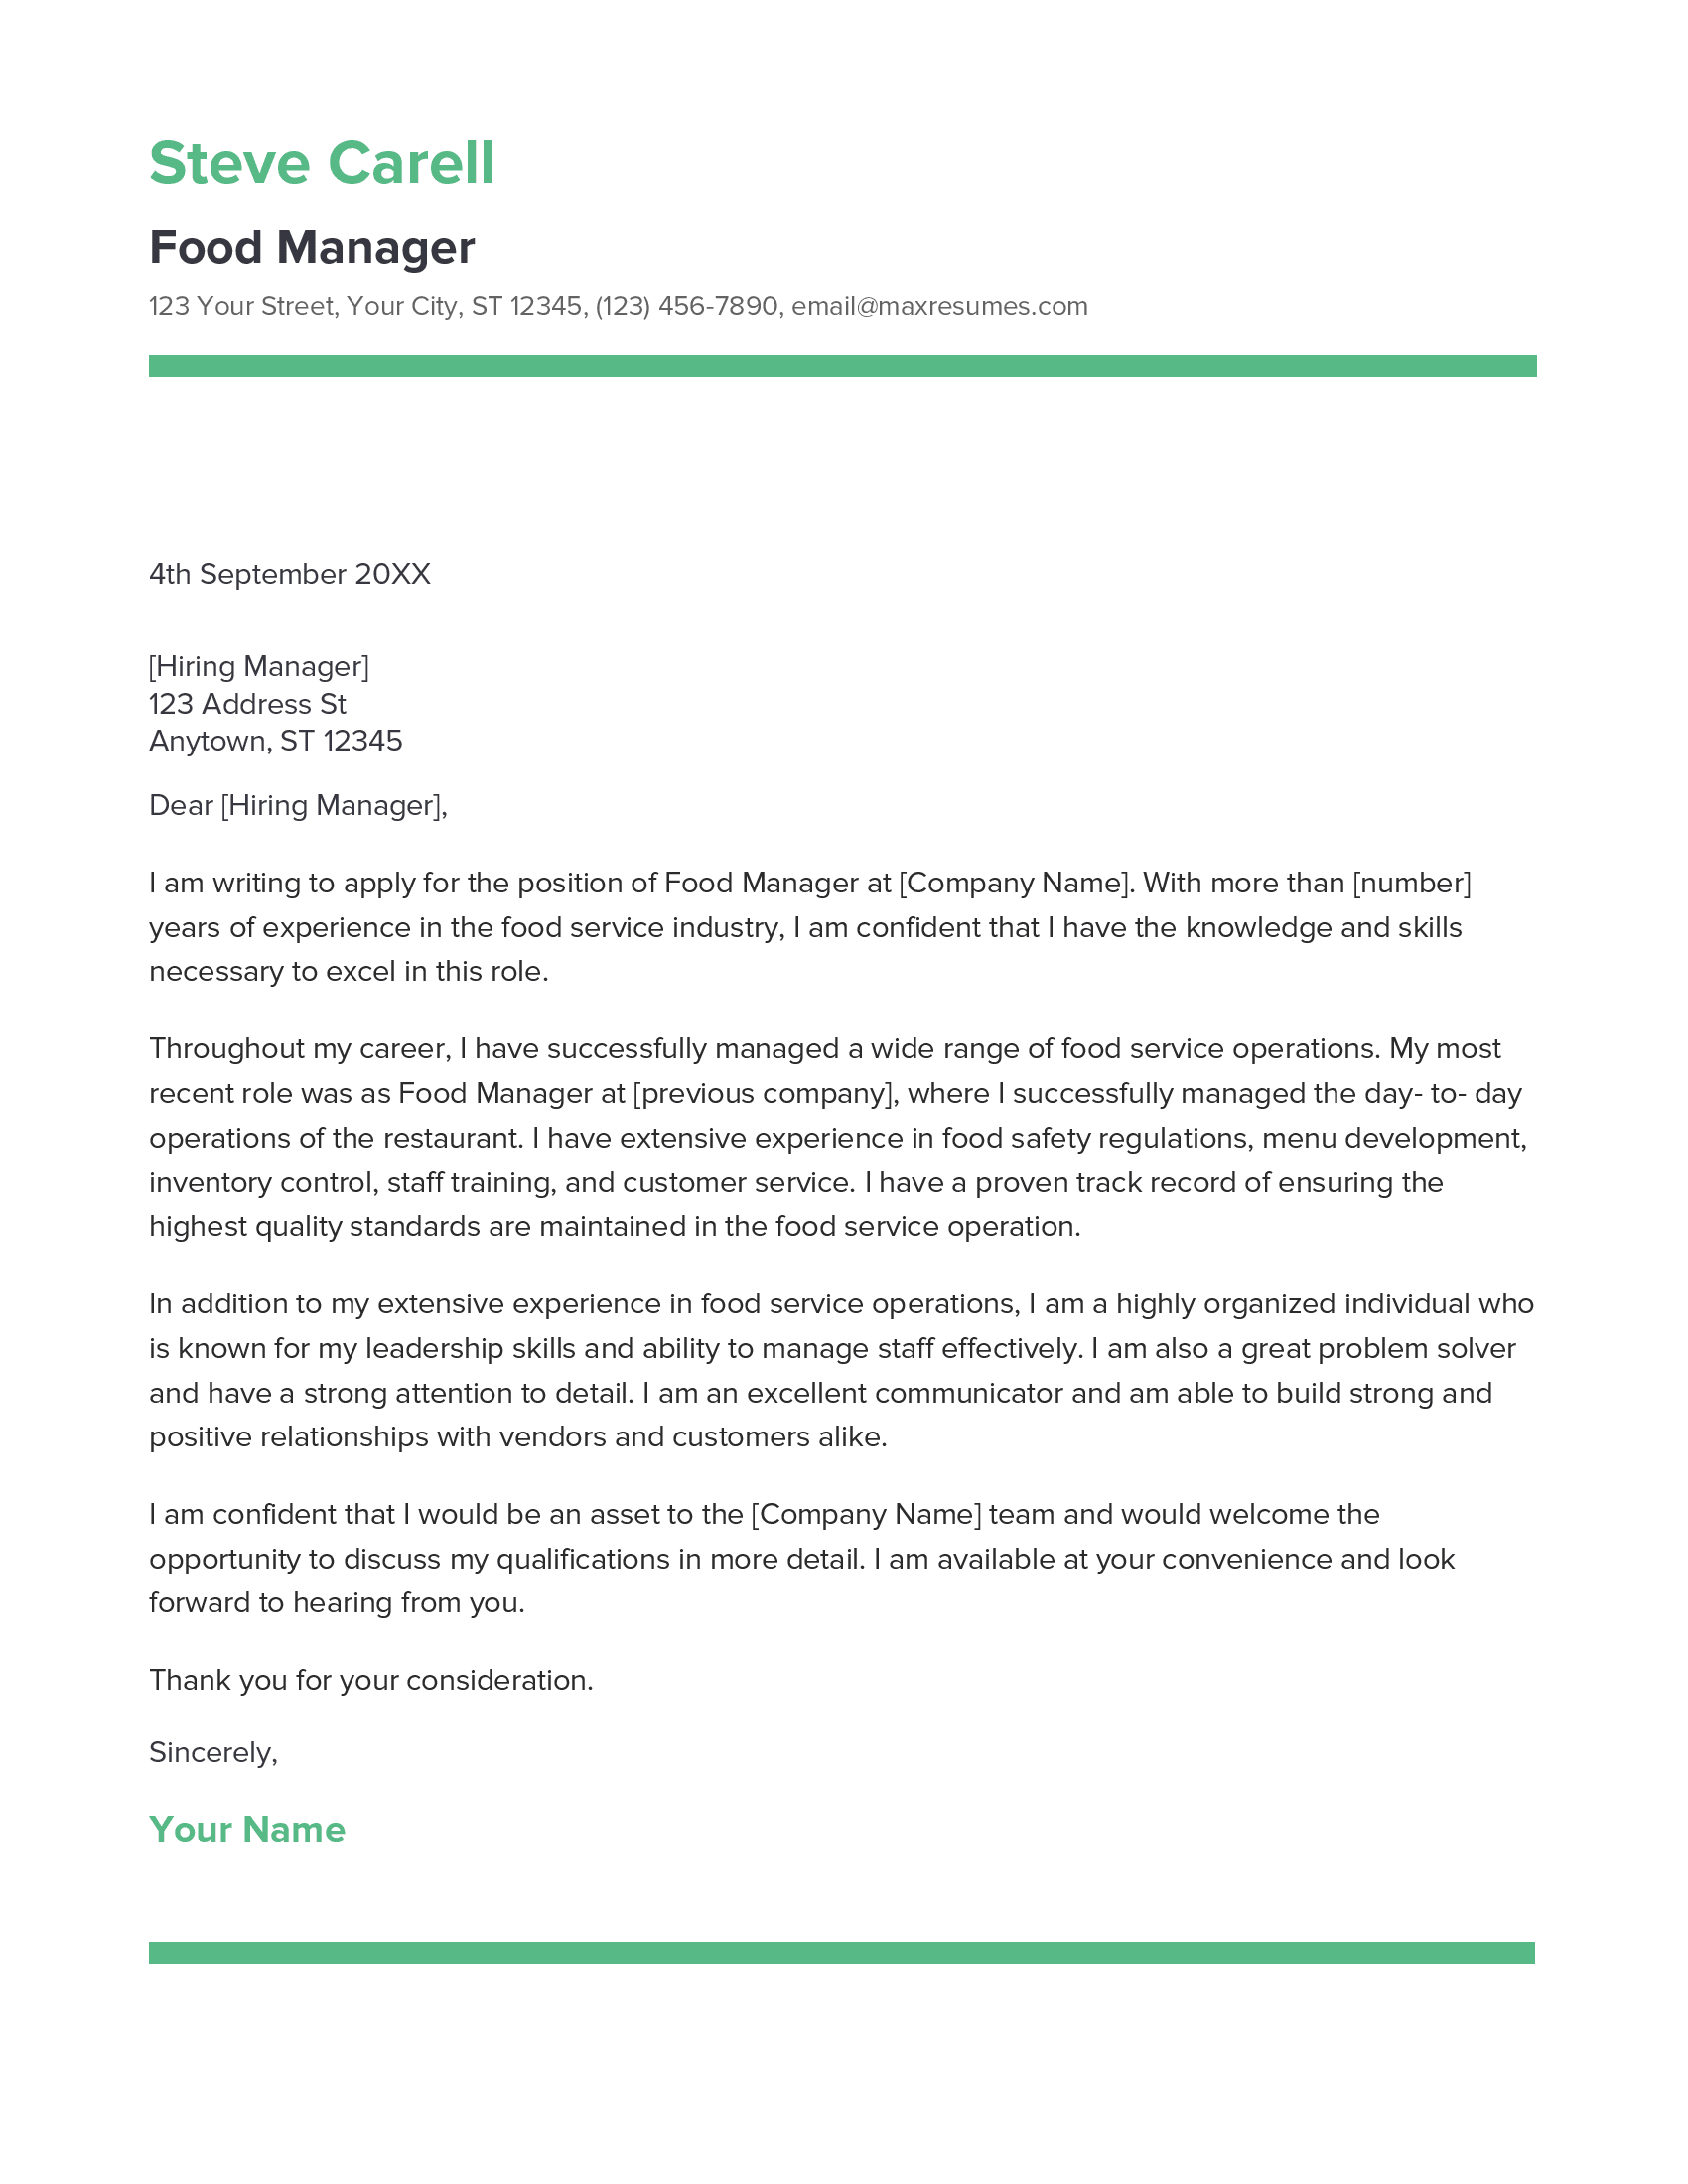 Food Manager Cover Letter Example